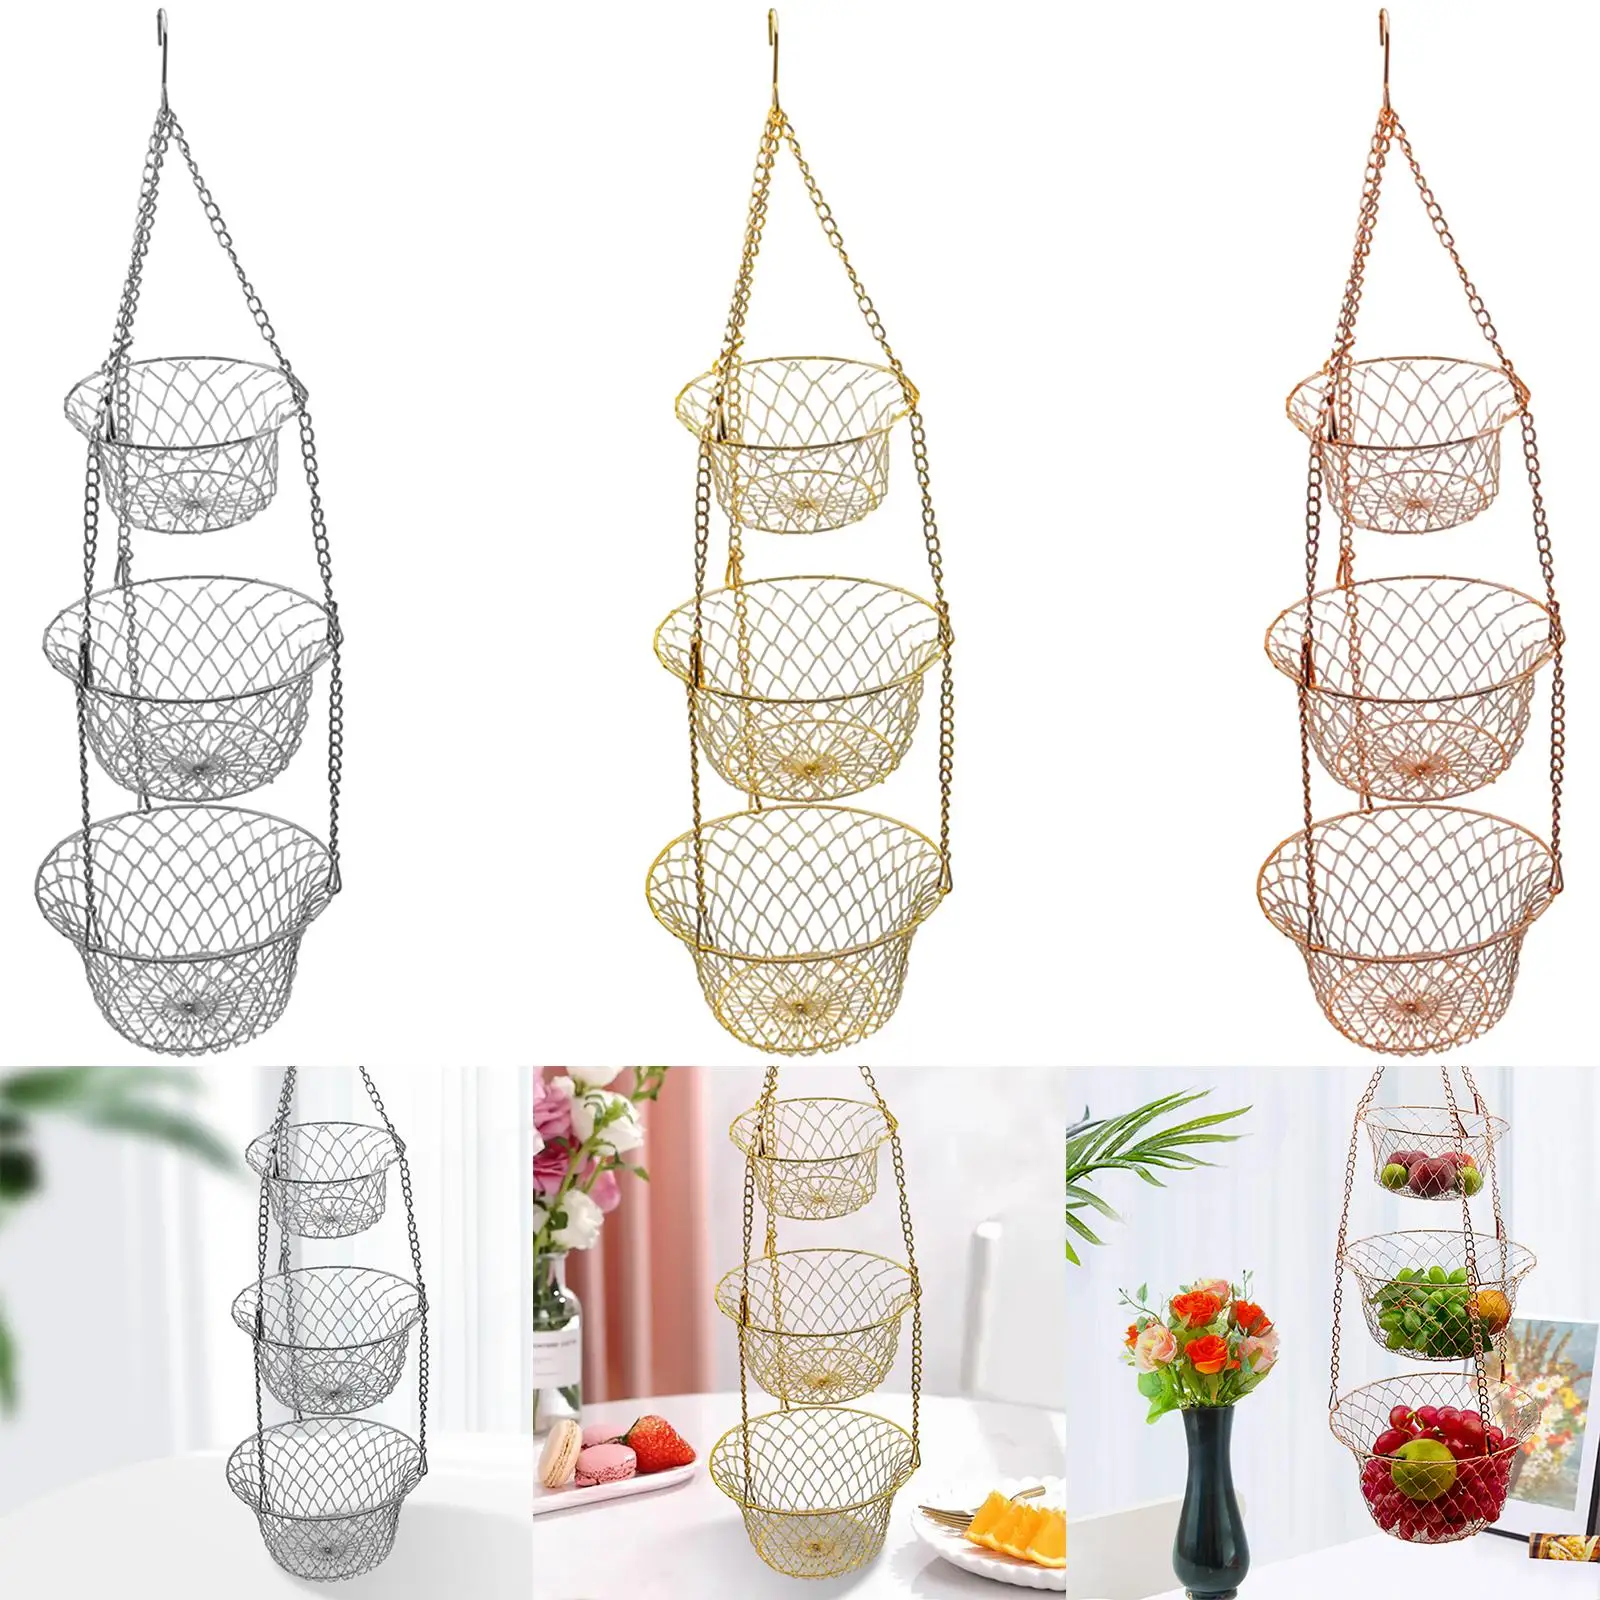 3 Tier Fruit Basket,Vegetable Kitchen Storage Basket Chain Hanging Space Saving Rustic Country Style